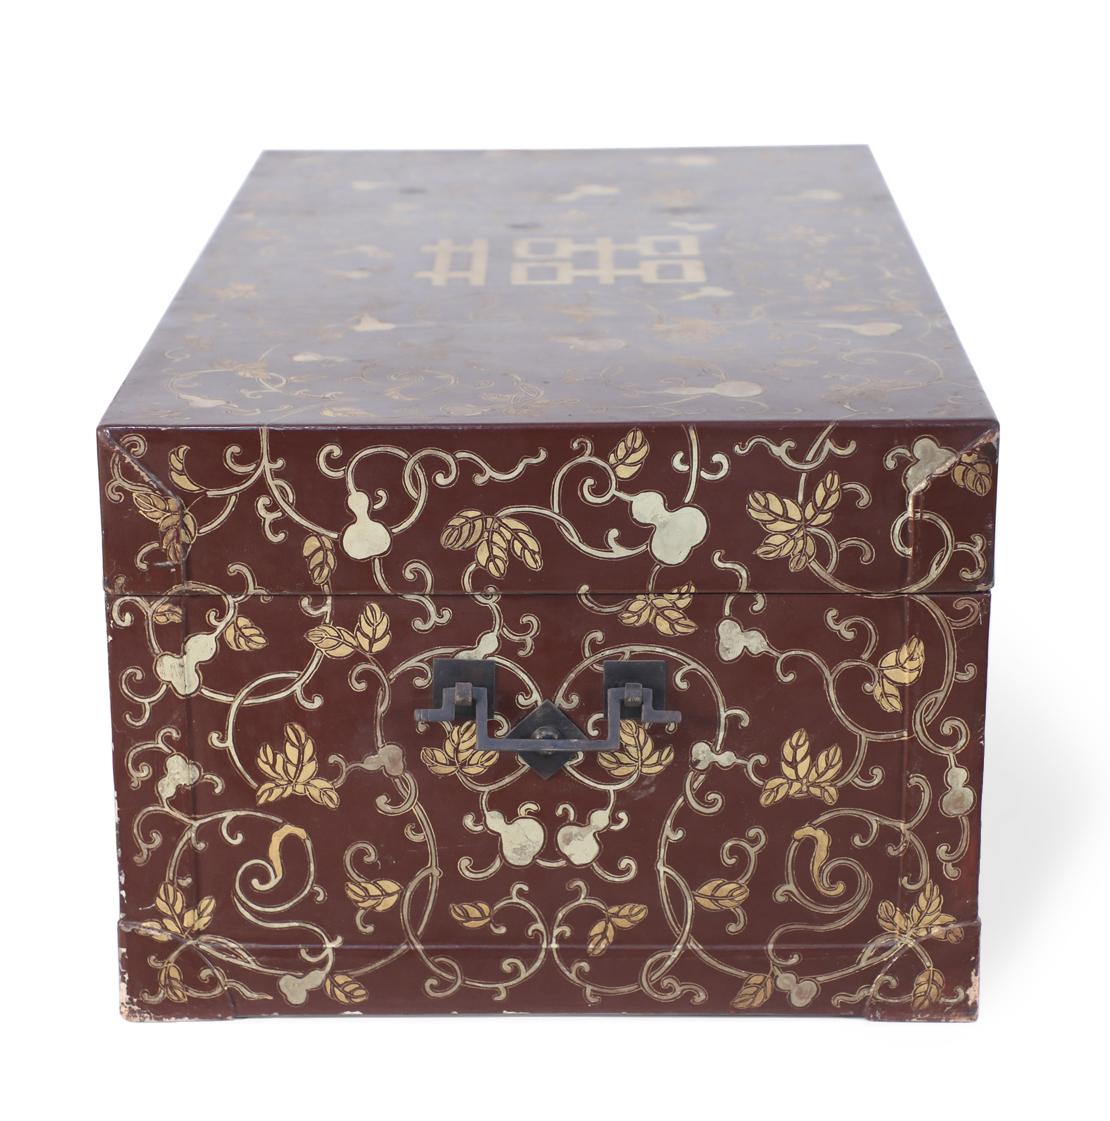 Wood Chinese Burgundy and Gold Vine Design Painted Decorative Box For Sale